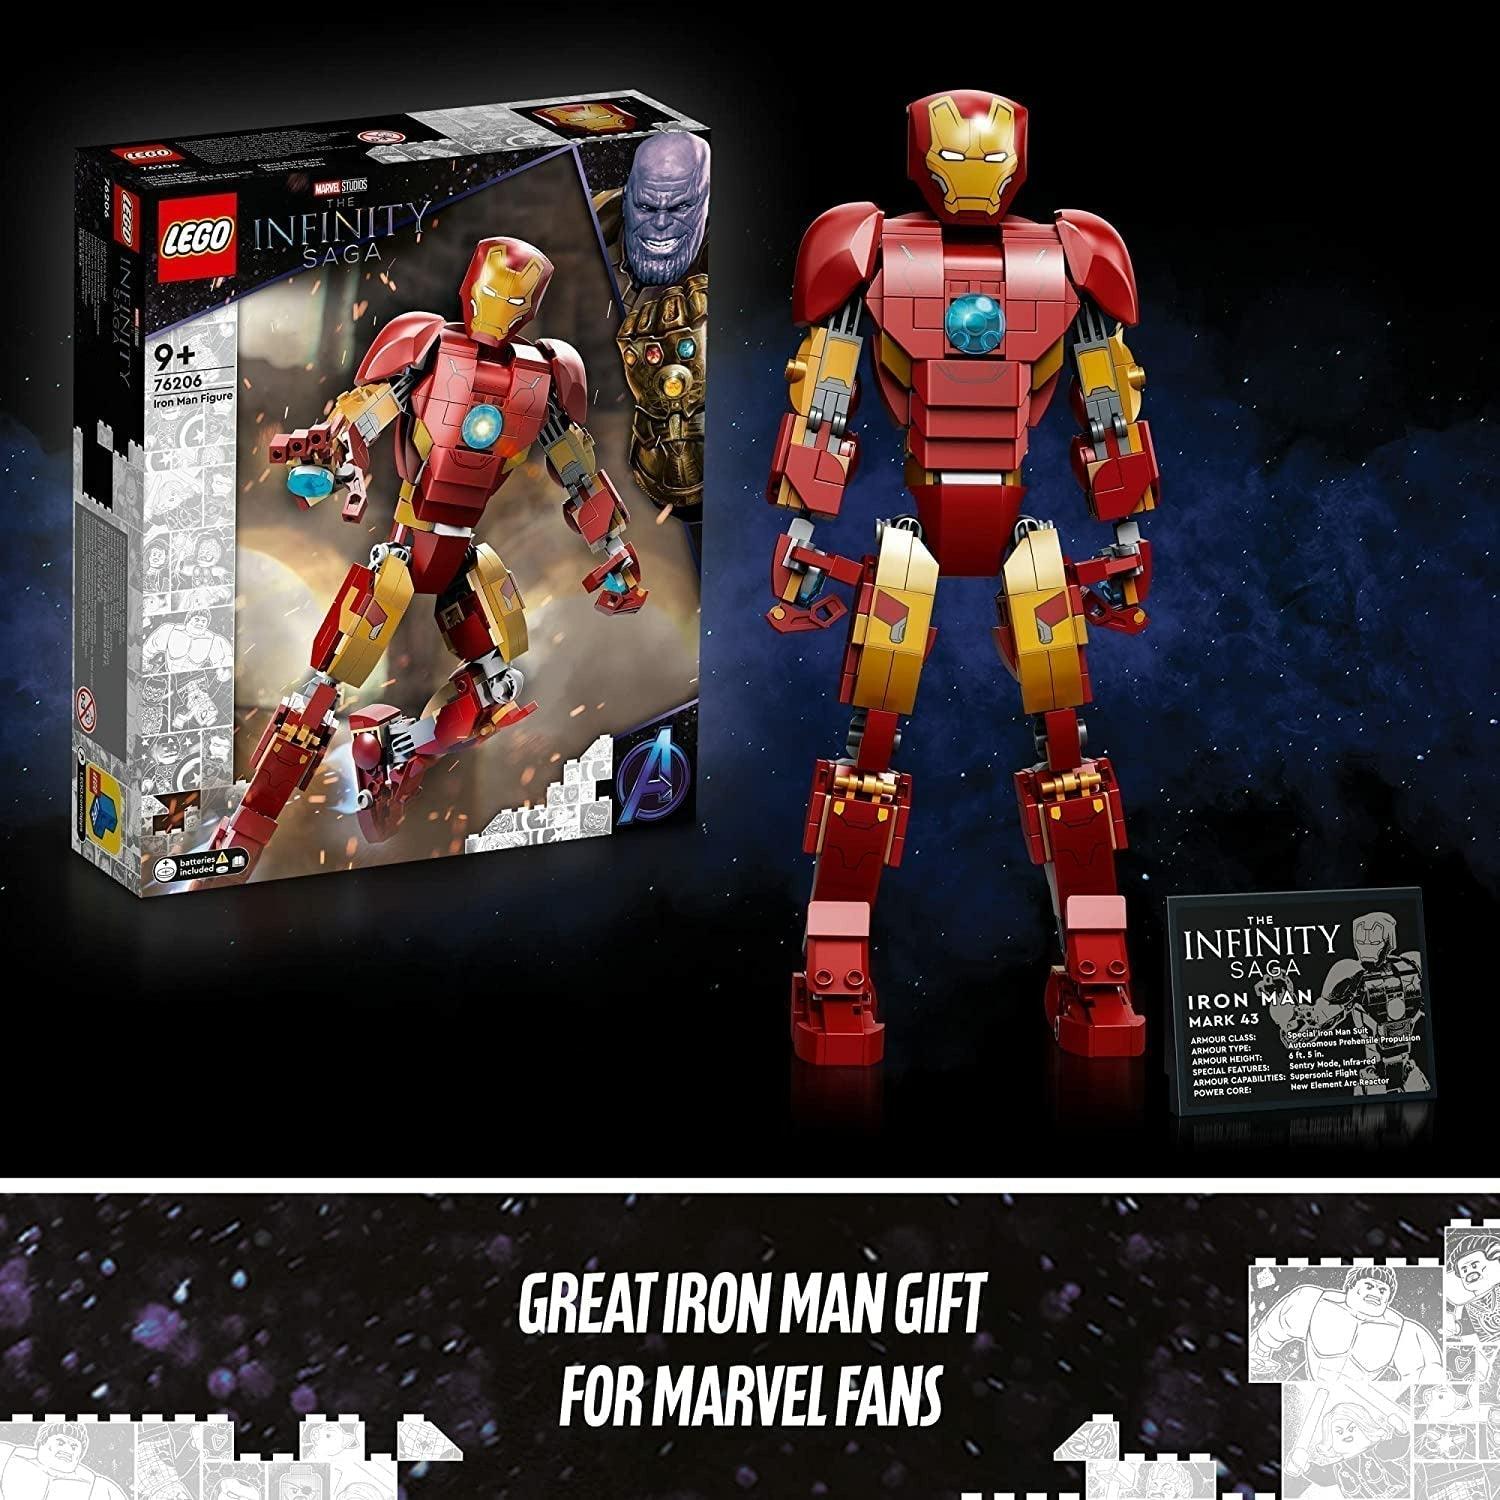 LEGO 76206 Marvel Iron Man Figure Realistic Model for Play & Display Based on Iron Man from Marvel Studios’ Avengers (381 Pieces) - BumbleToys - 8+ Years, 8-13 Years, Action Figures, Avengers, Boys, Figures, Iron man, LEGO, Marvel, OXE, Pre-Order